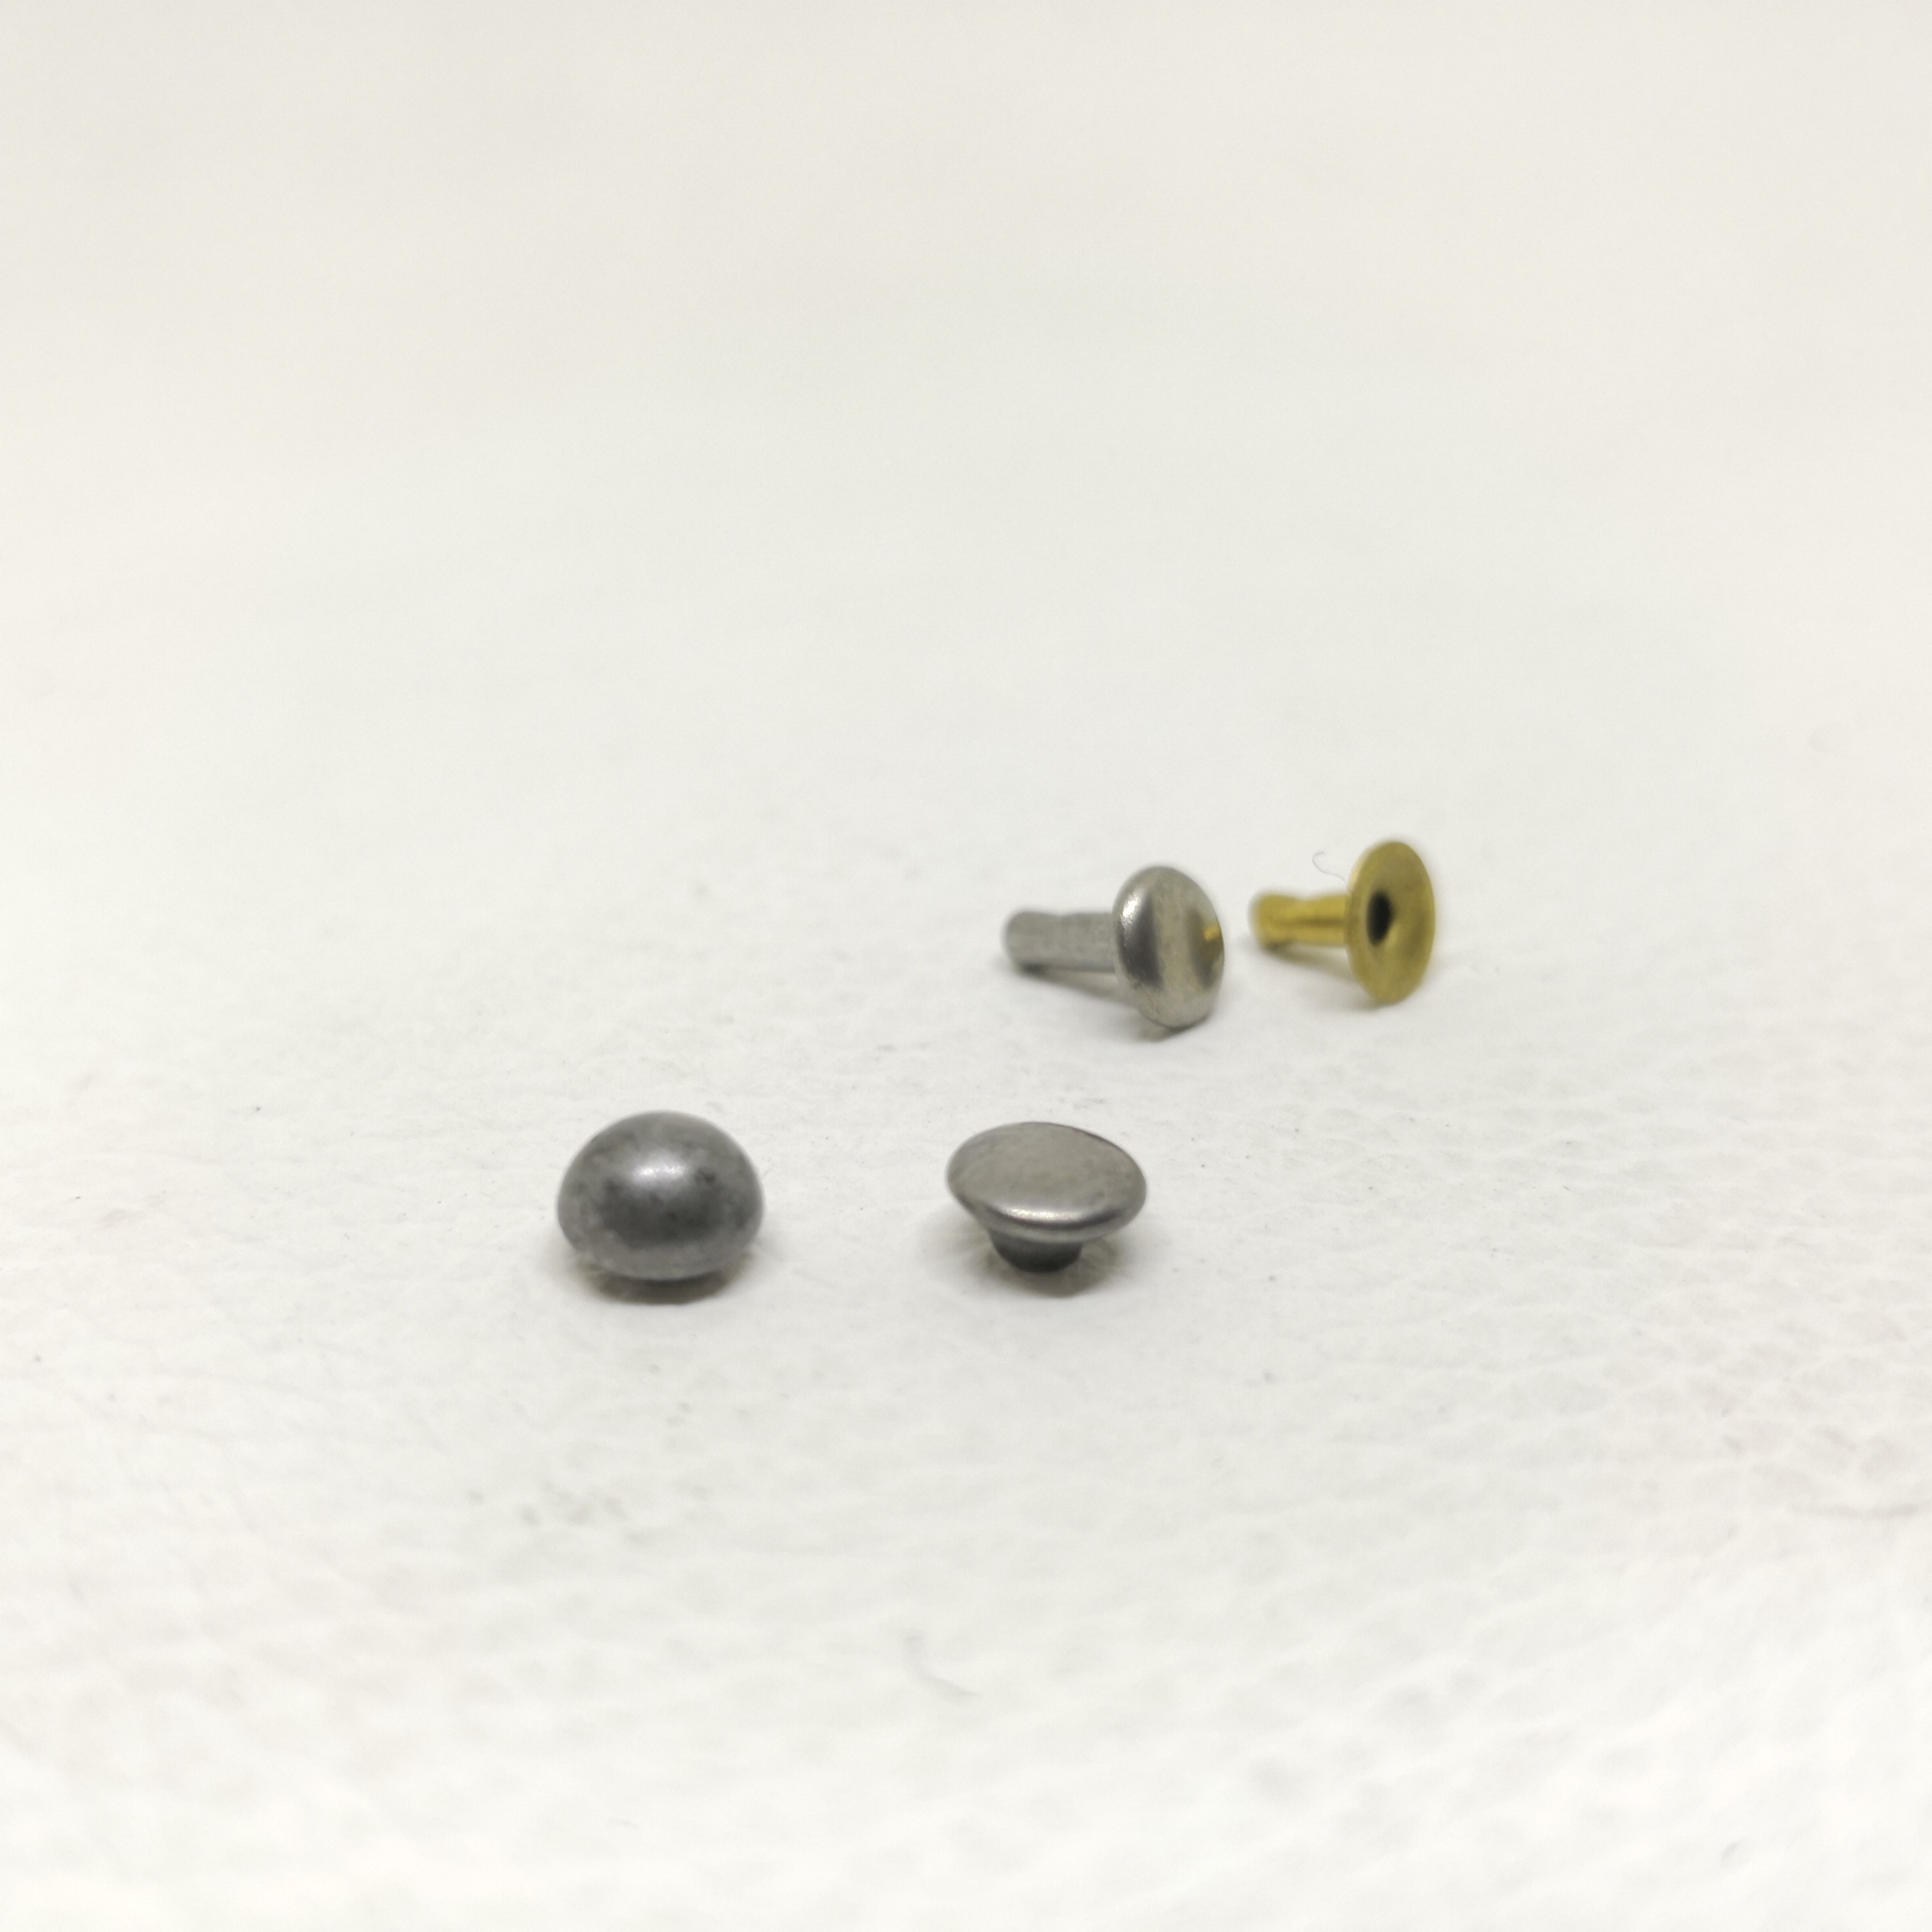 6mm 8mm 9mm 10mm 12mm Brass or Iron Single or Double Rivets